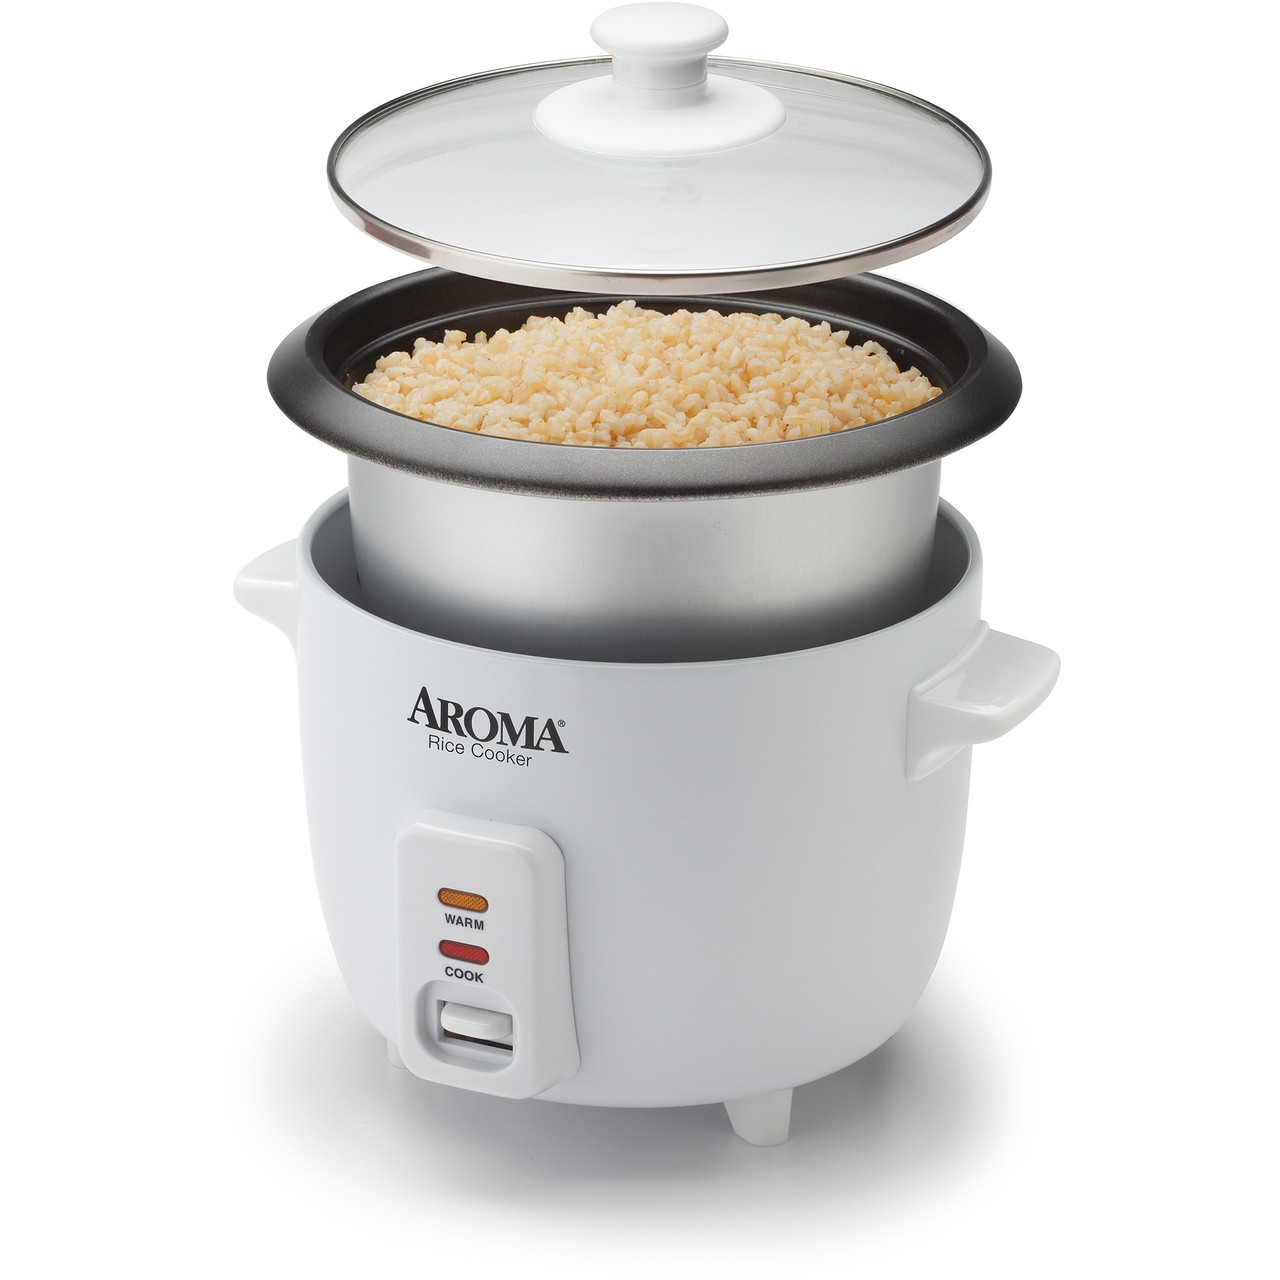 Wolfgang Puck 1.5-Cup Rice Cooker